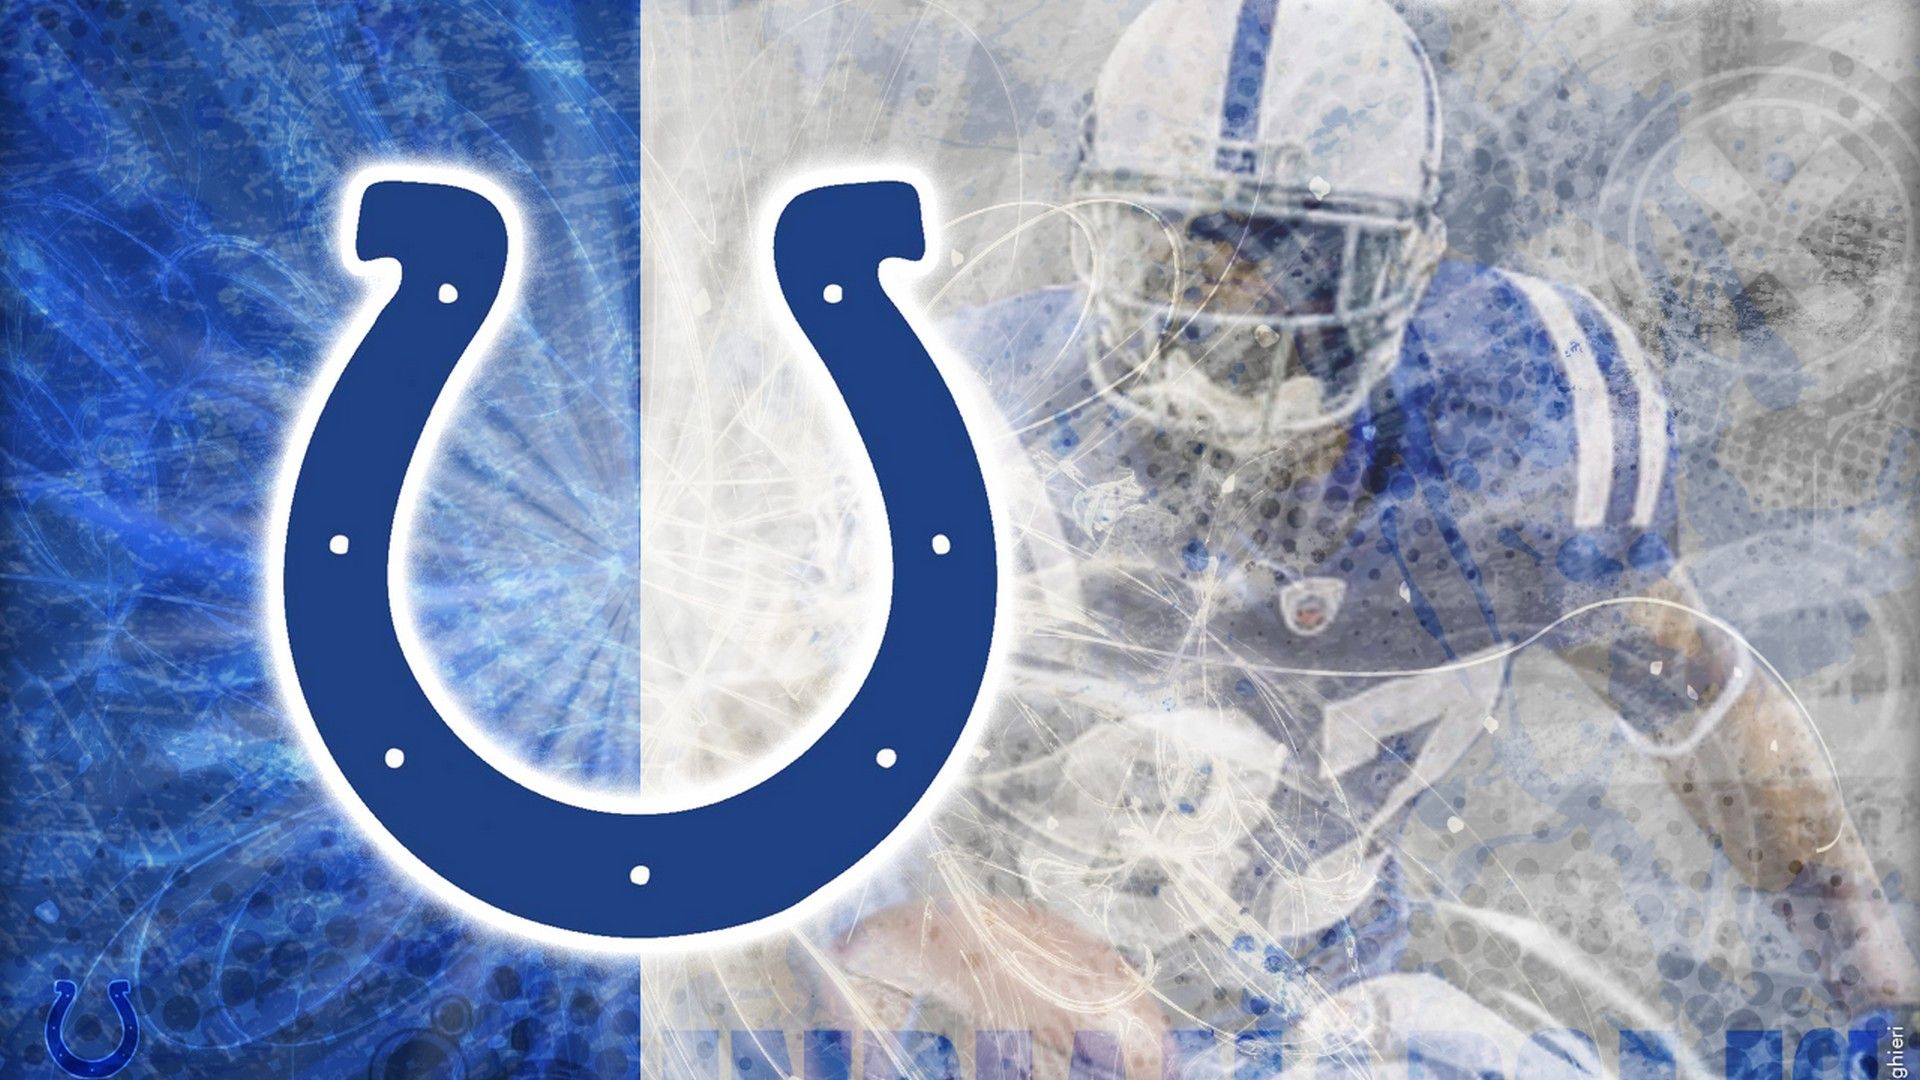 Indianapolis Colts Background HD Nfl Football Wallpaper